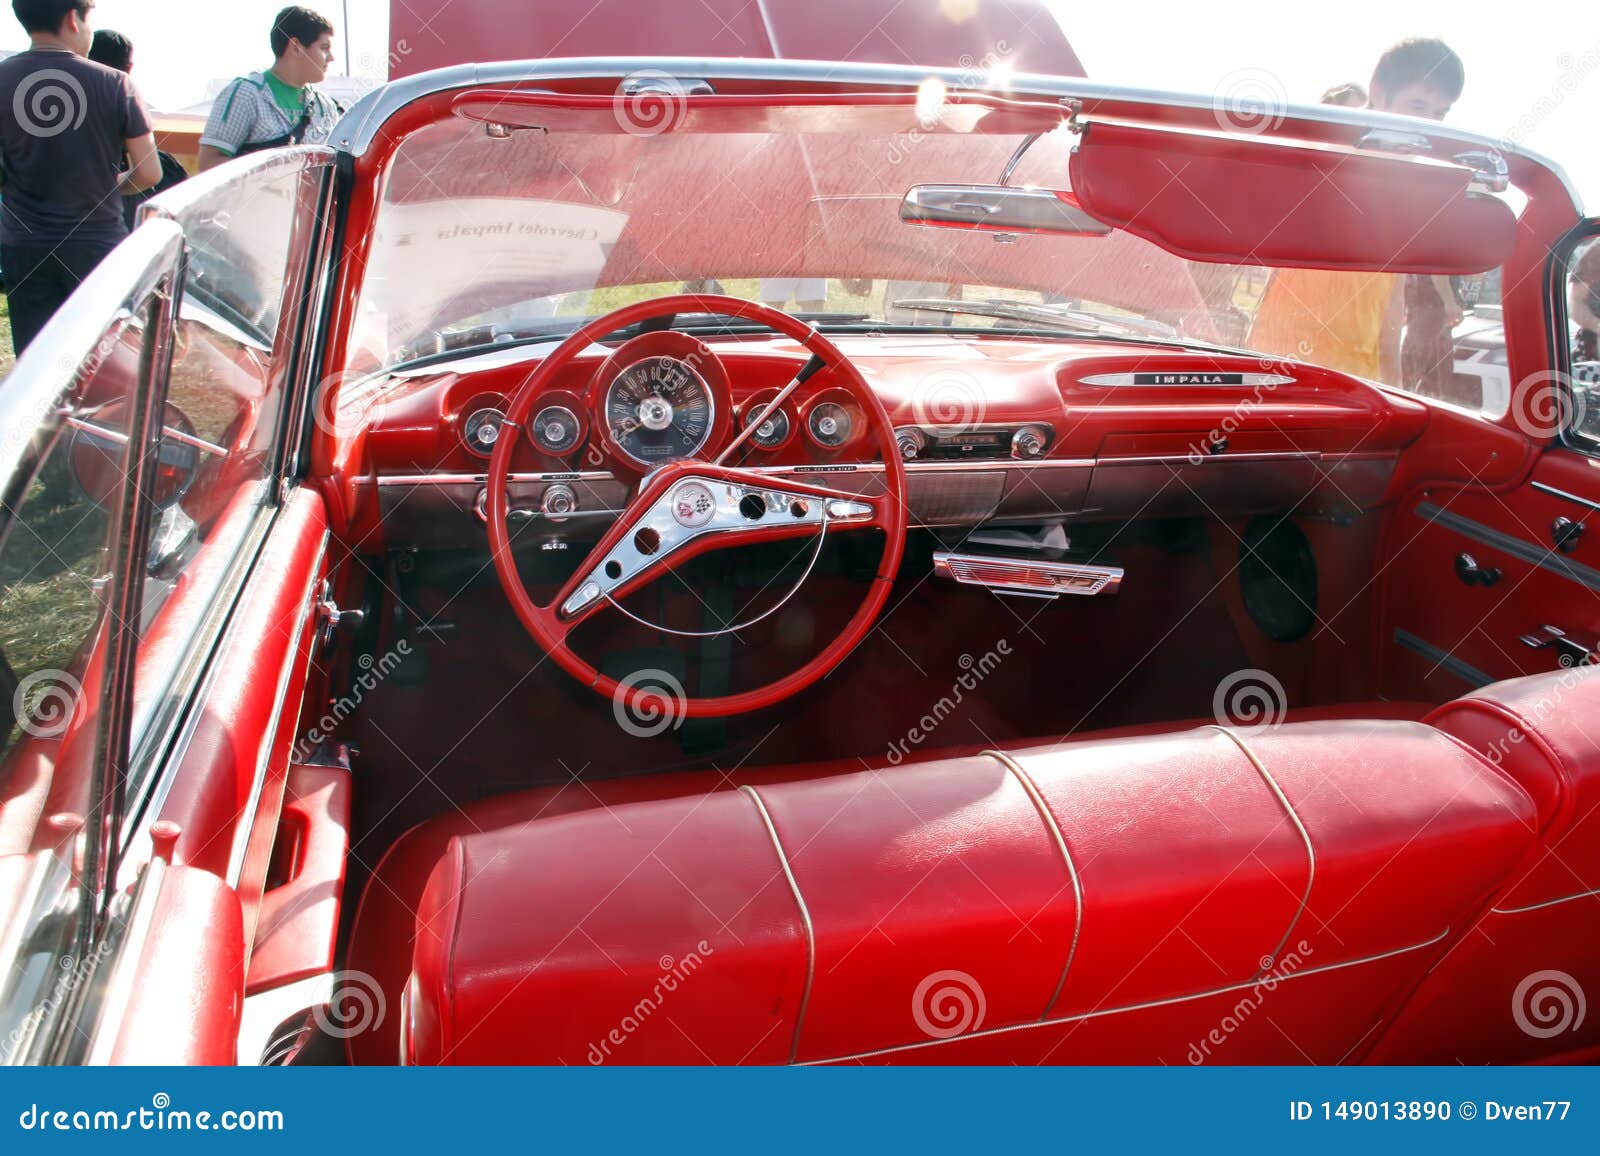 Moscow Russia May 25 2019 Interior Of A Vintage Car